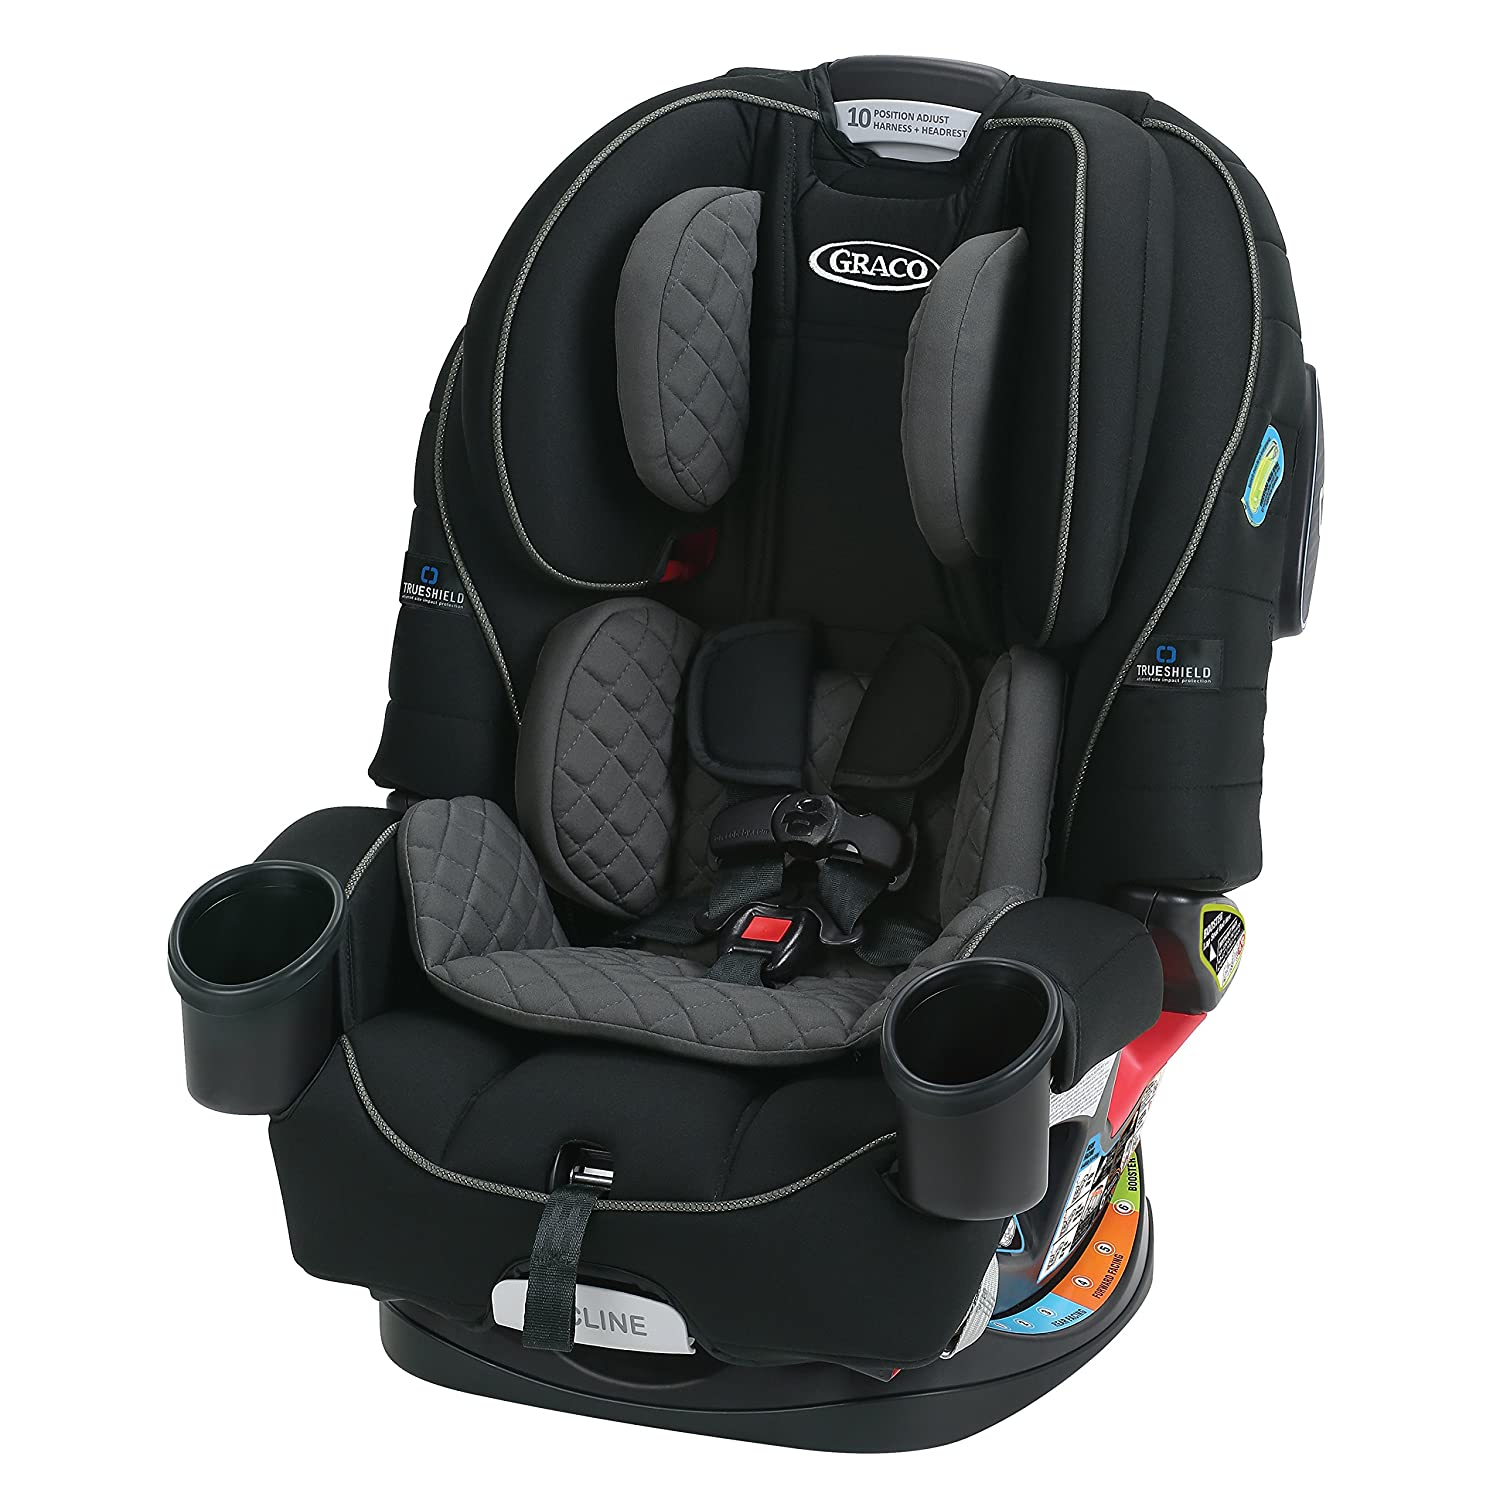 The Best Portable Baby Car Seat For 1 Year Old Reviews